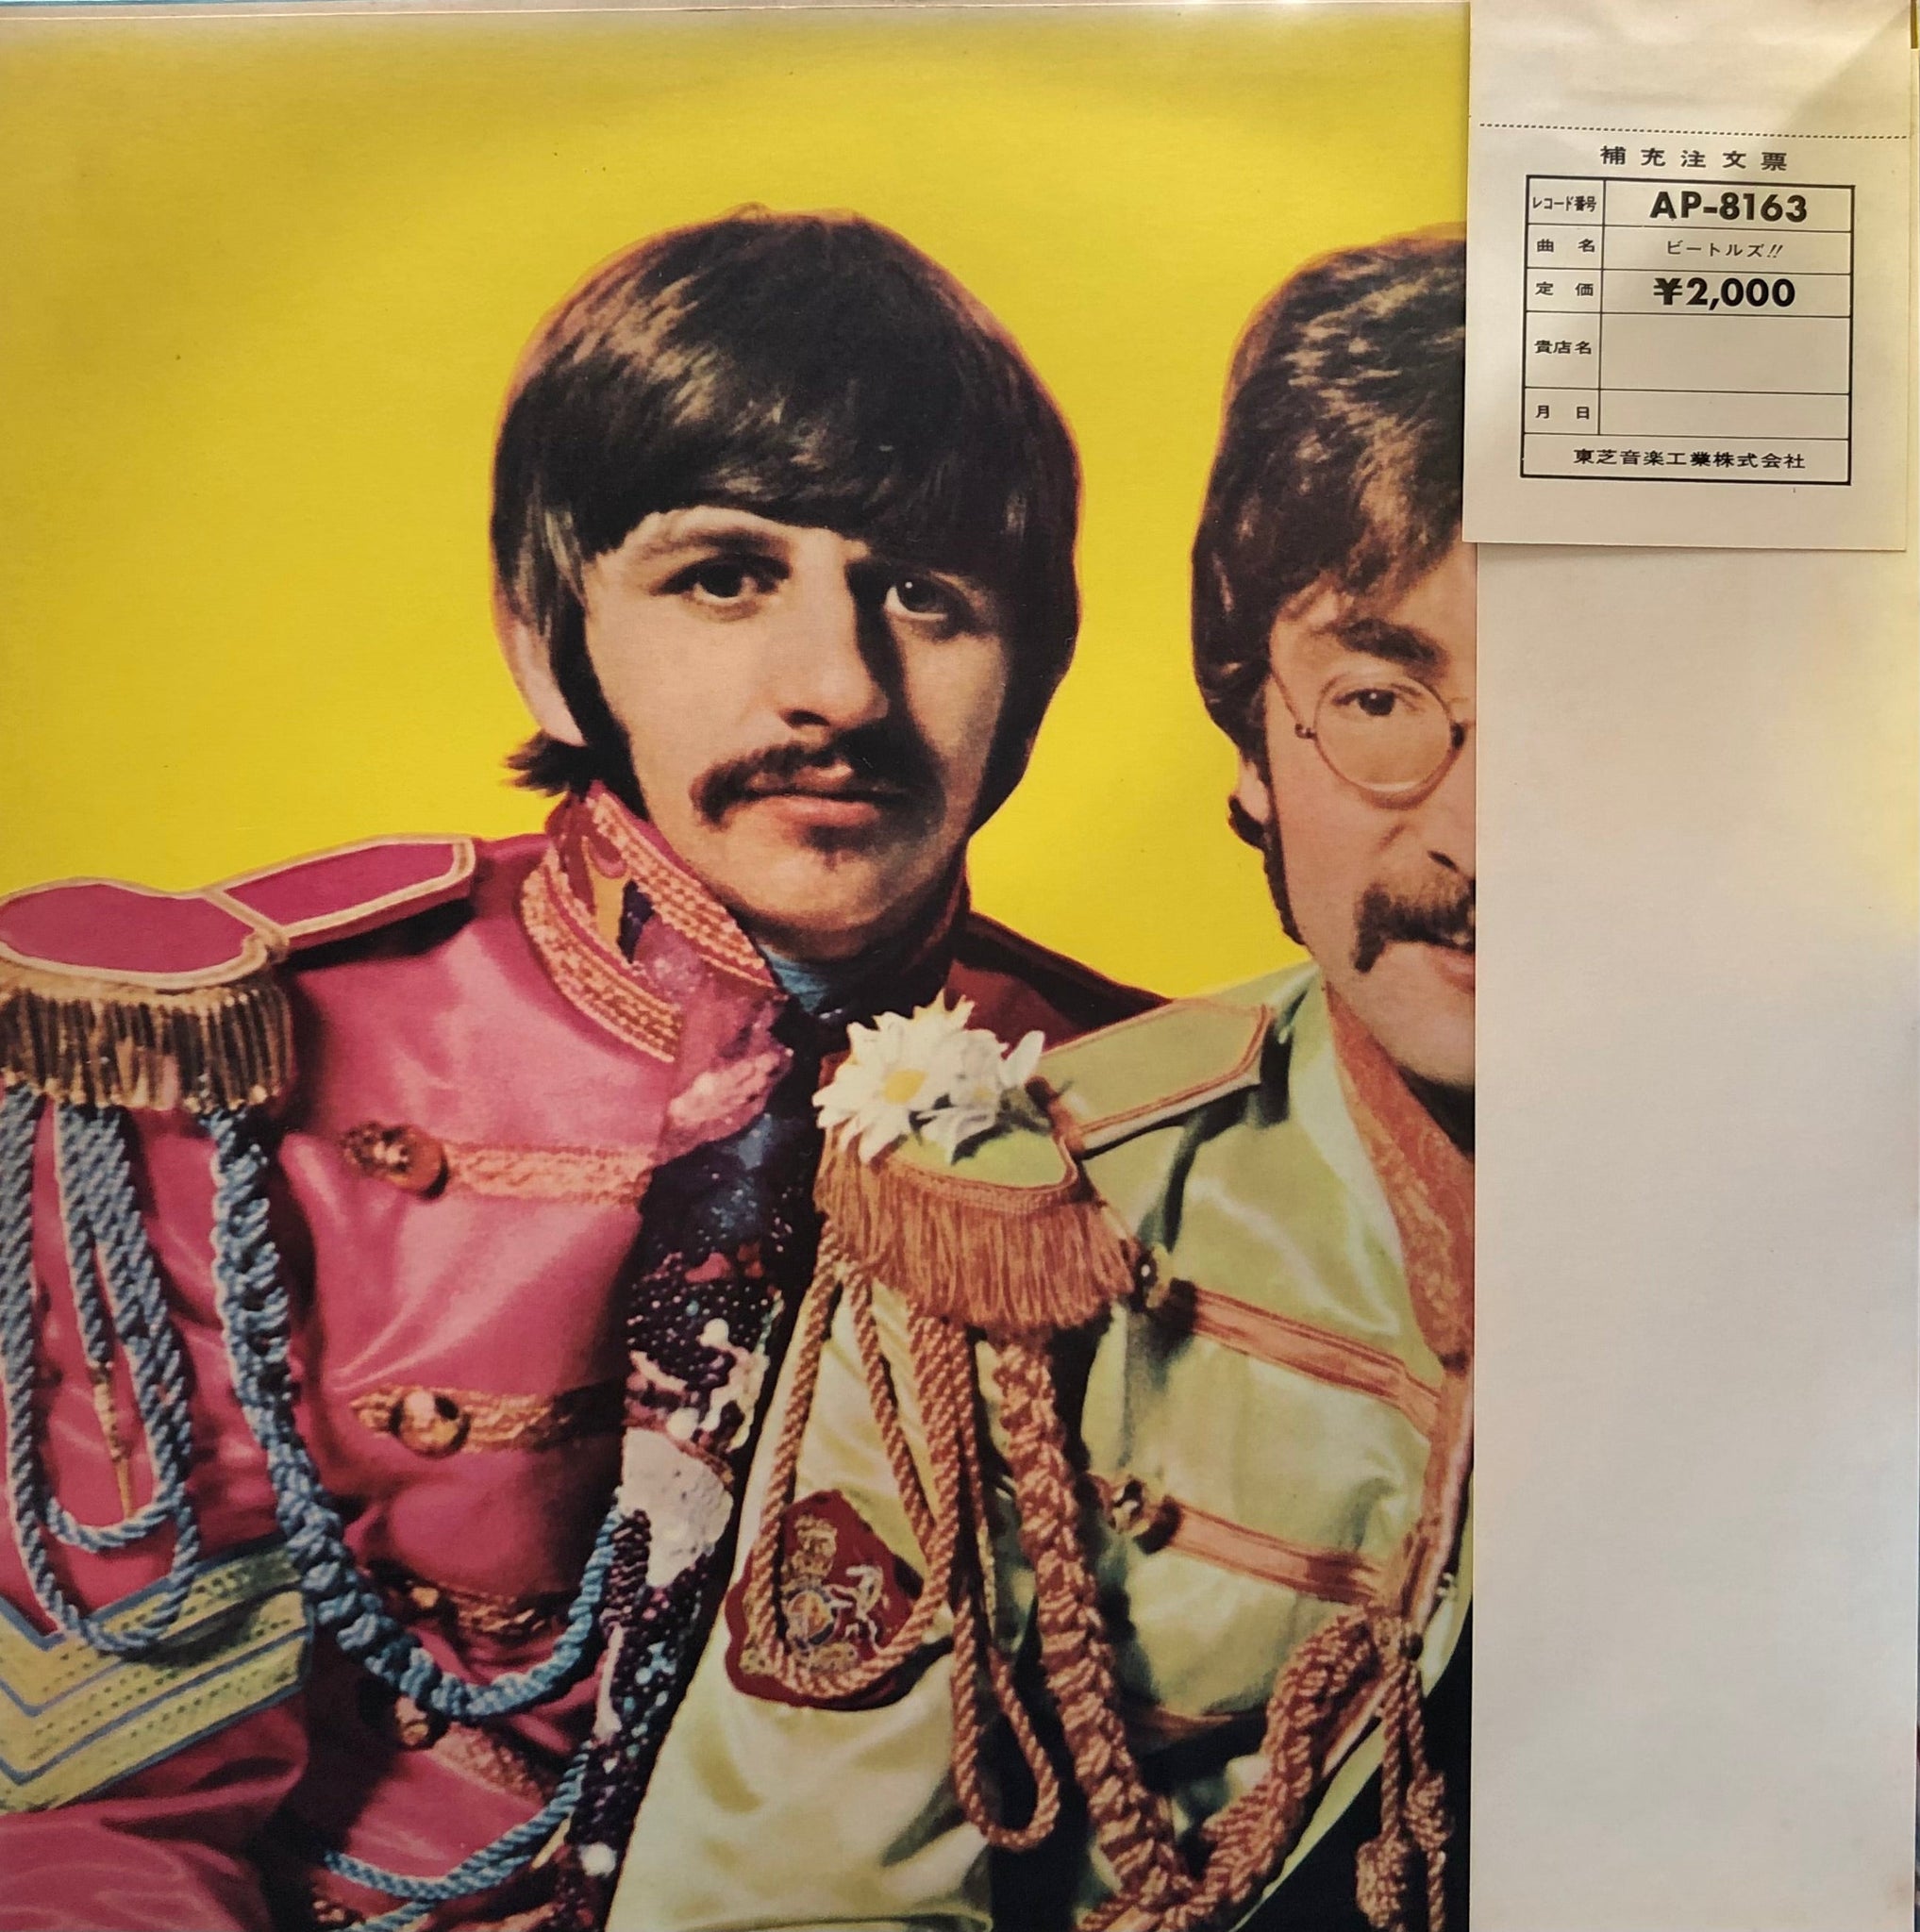 BEATLES / Sgt. Pepper's Lonely Hearts Club Band 帯、補充票付き 